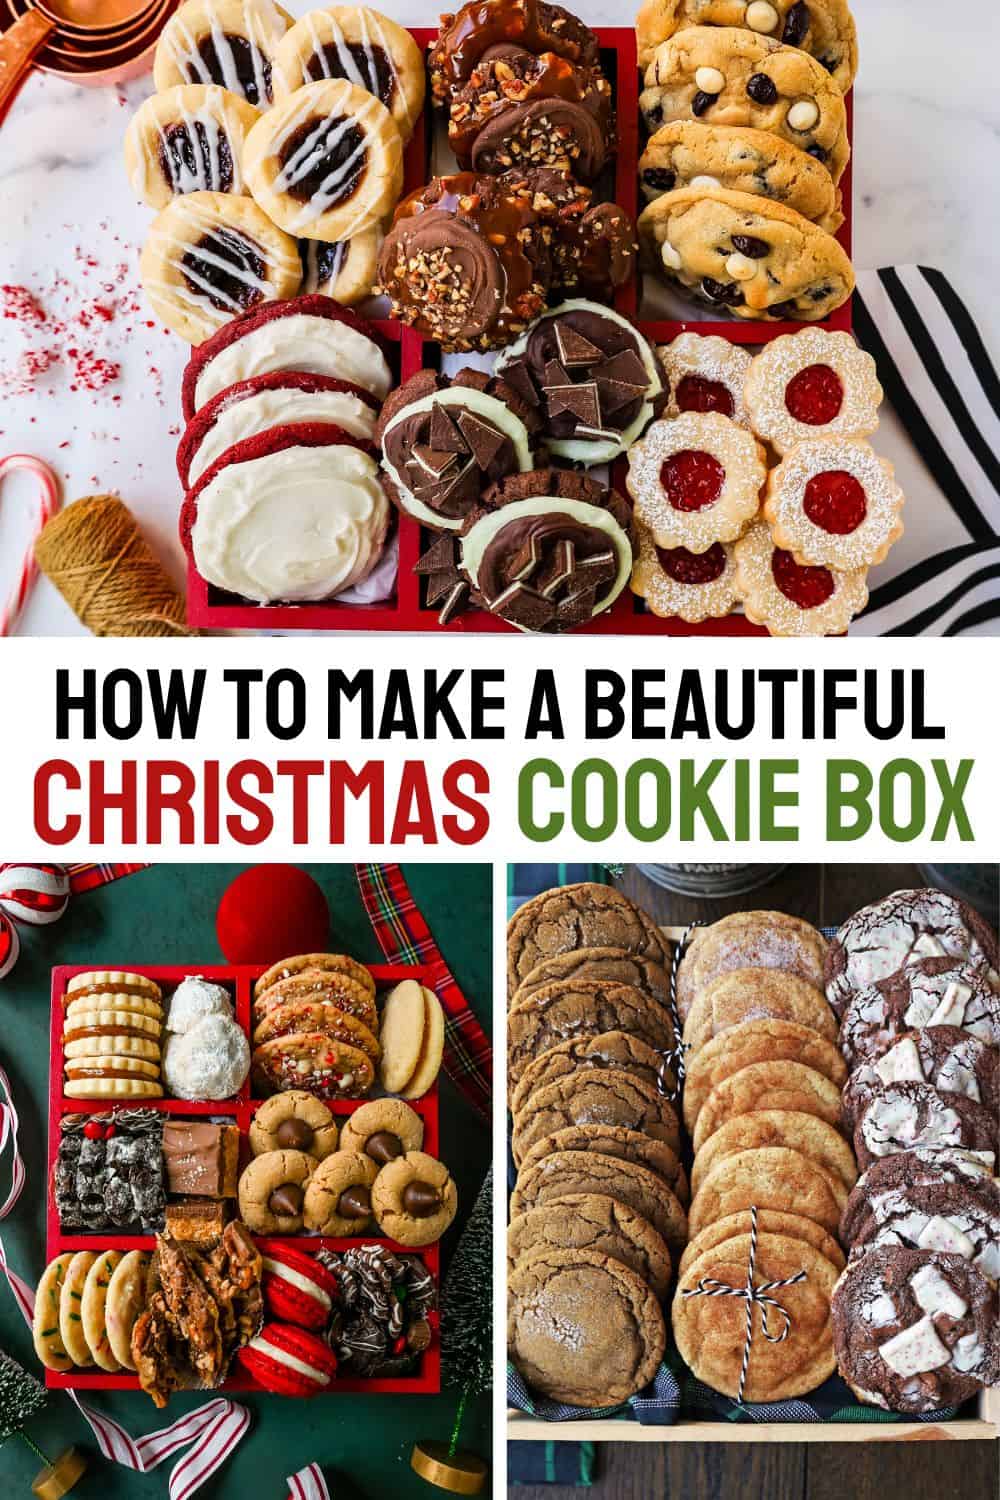 How to make a beautiful and festive Christmas Cookie Box. 80 Christmas Cookie Recipes plus tips on how to make your own Christmas cookie box to gift to friends and family. The Best Christmas Cookie Recipes.